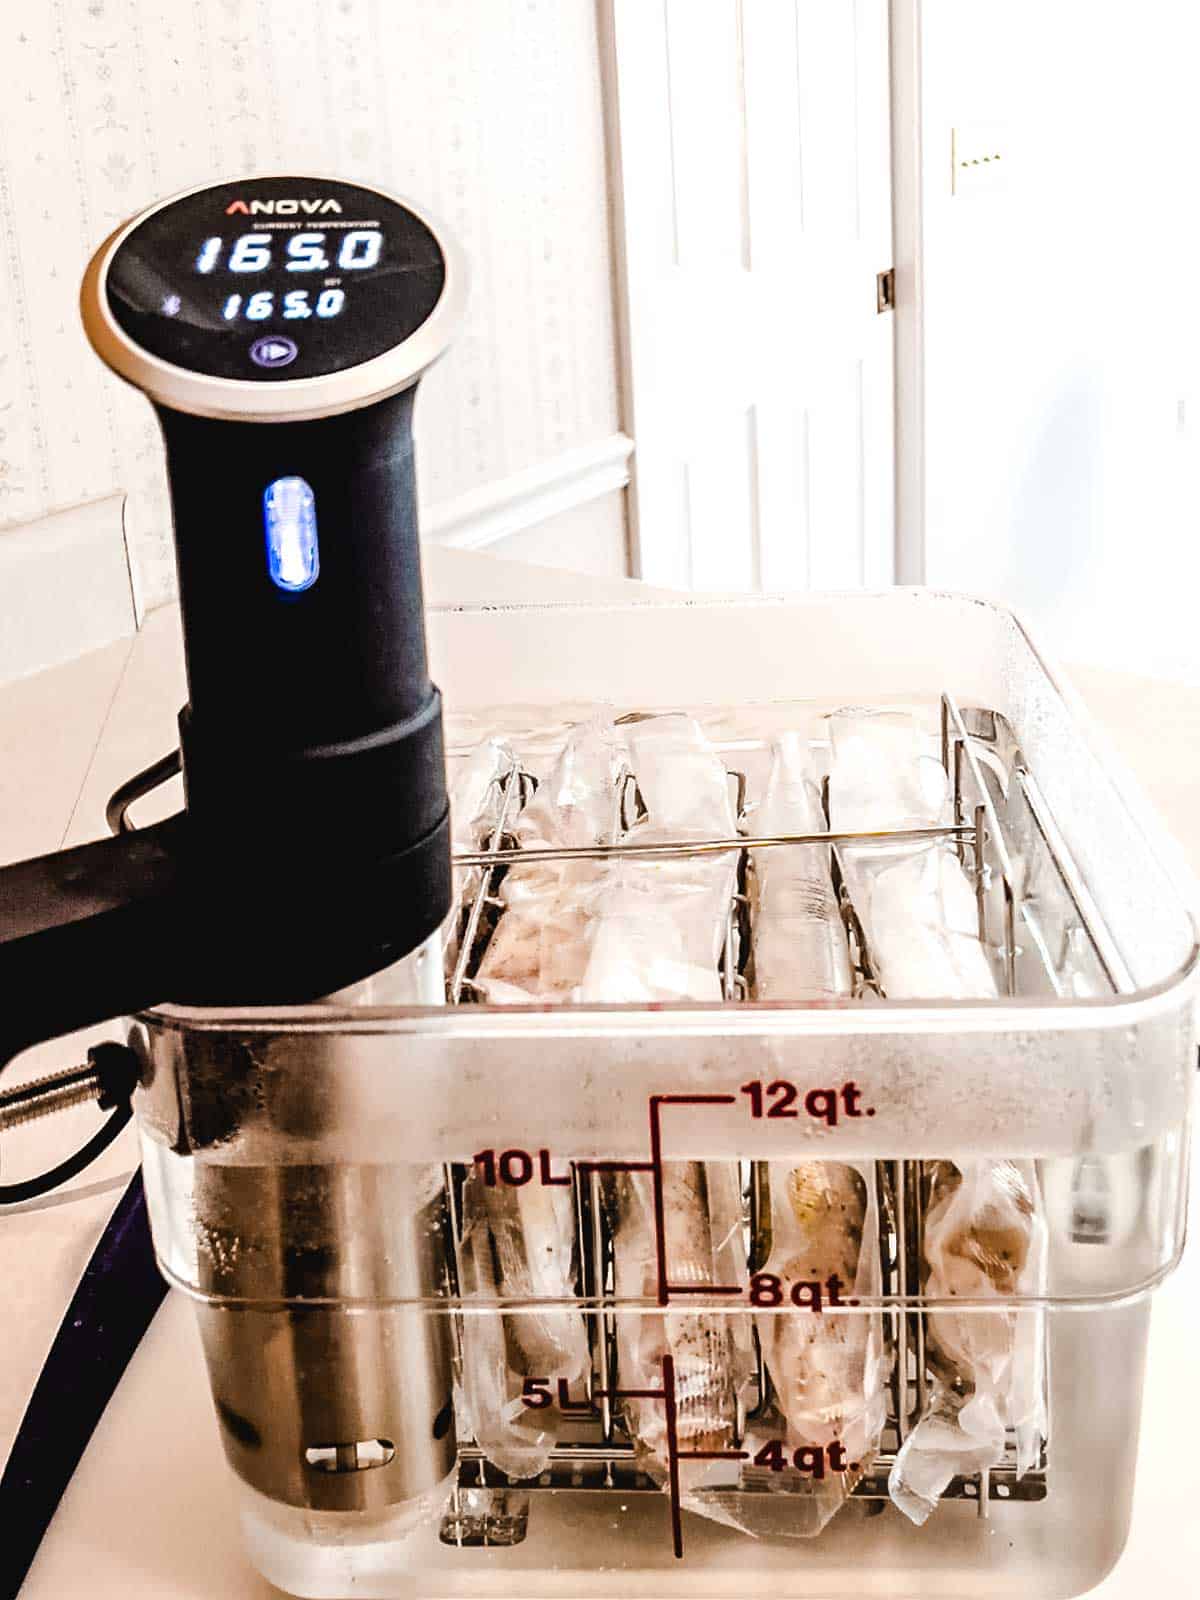 Chicken thighs in sous vide container.